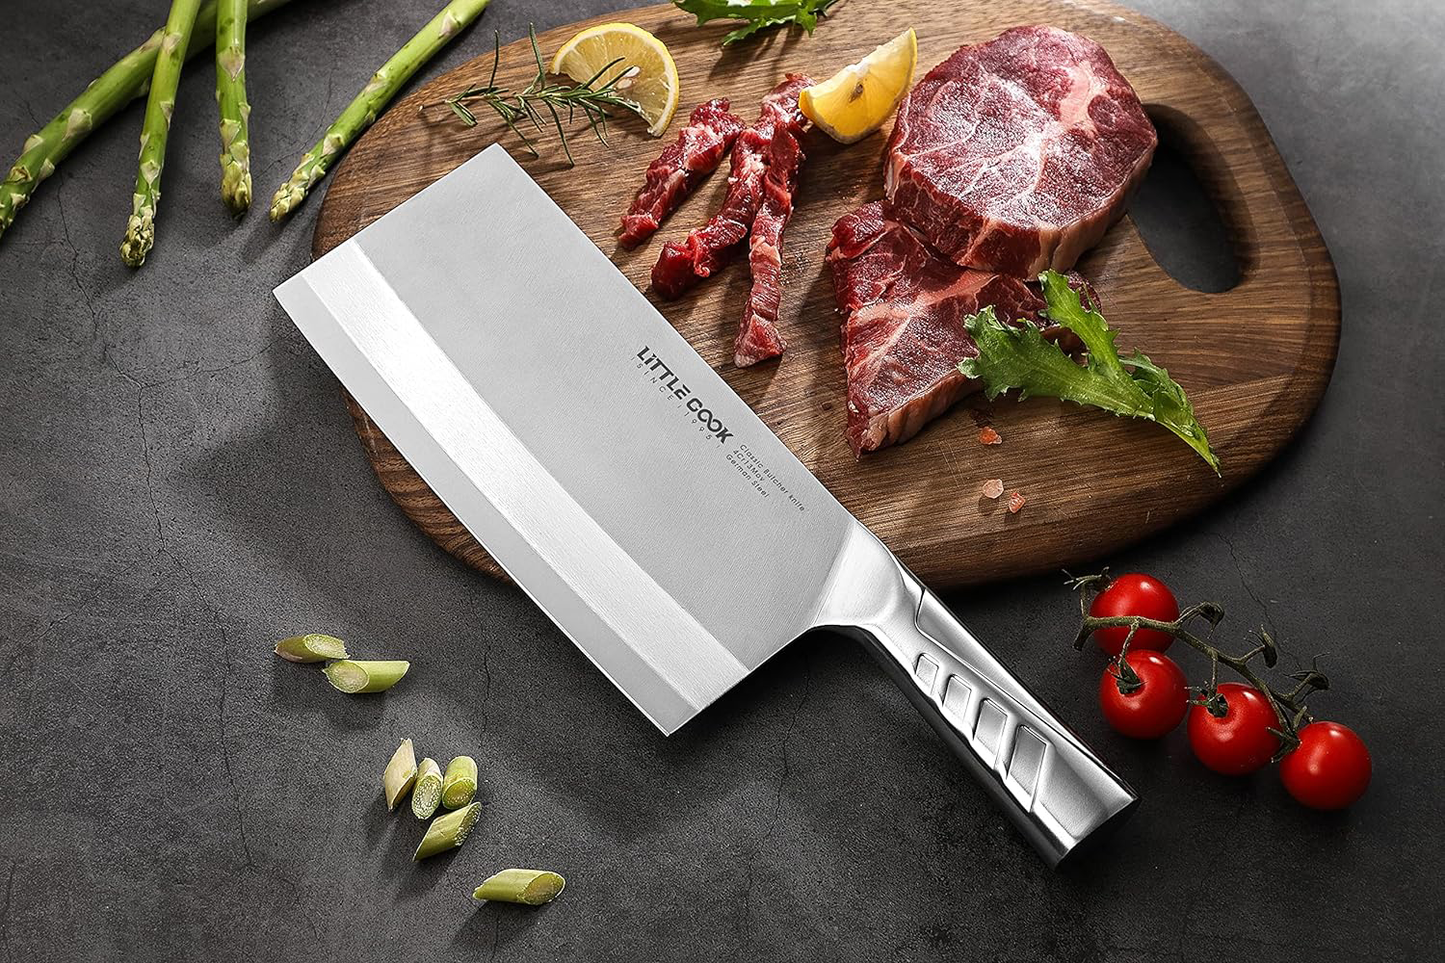 KD Little Cook 8 Inch Meat Cleaver: Stainless Steel Butcher Knife for Home Kitchen and Restaurant, Ideal for Meat and Vegetables